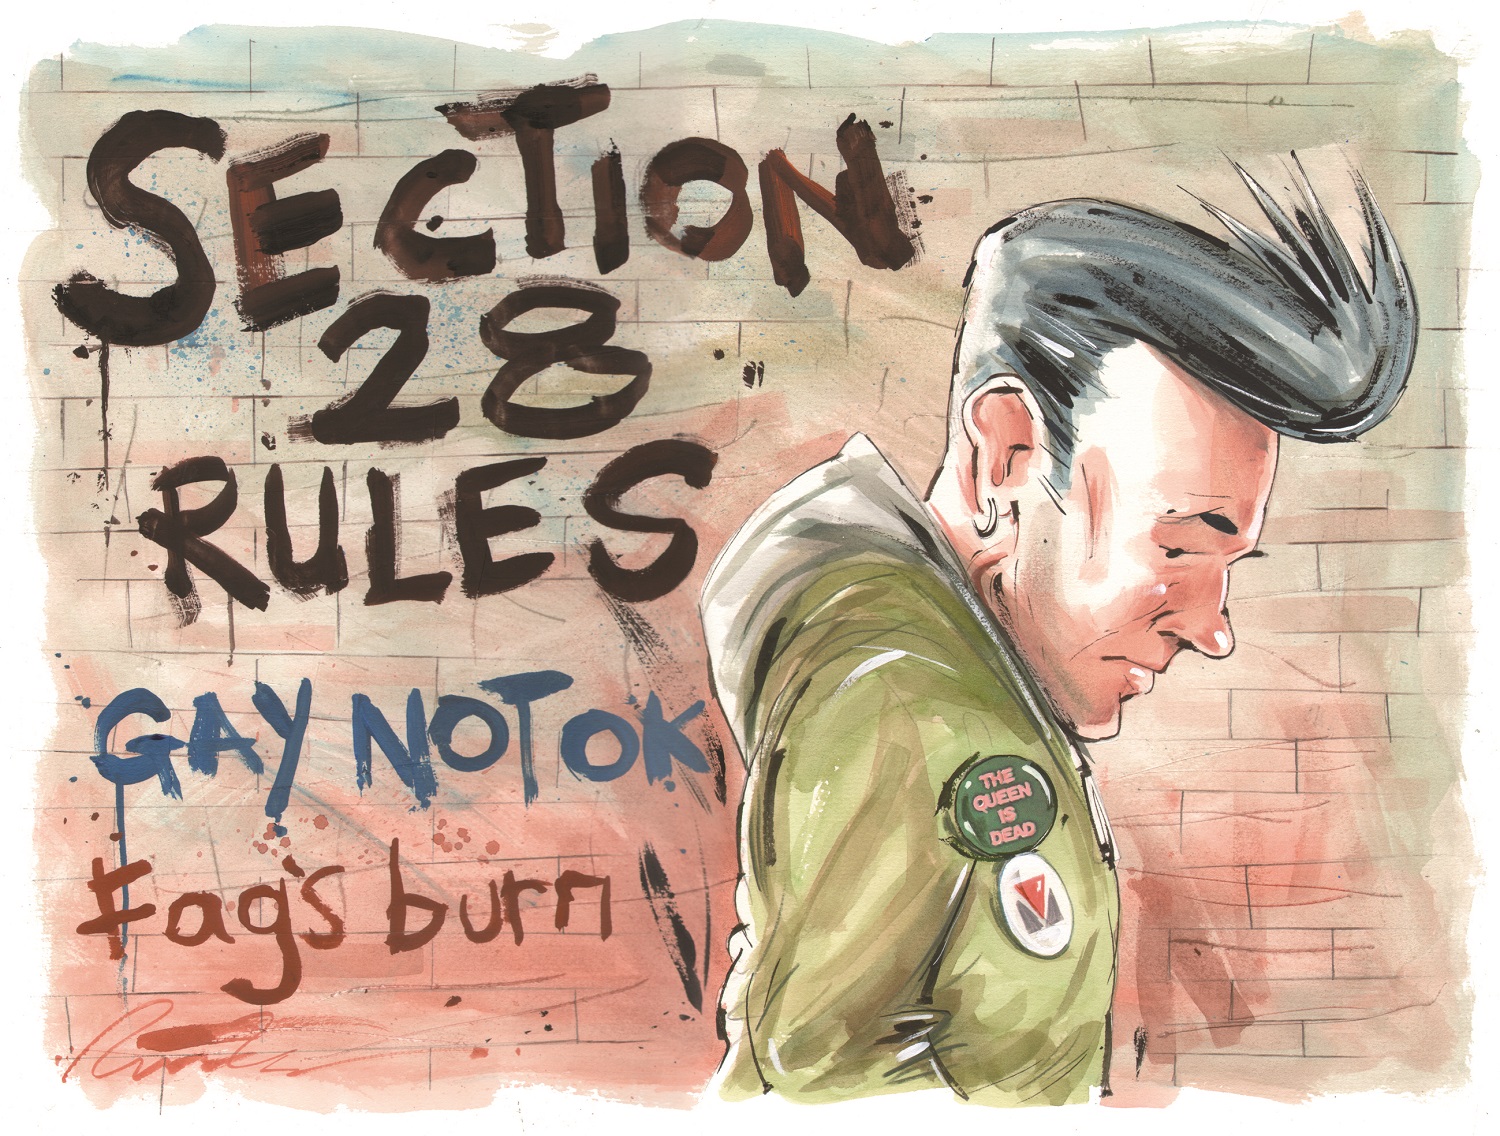 Louis & number 28 - The original meaning behind it: Section 28 in the UK  law